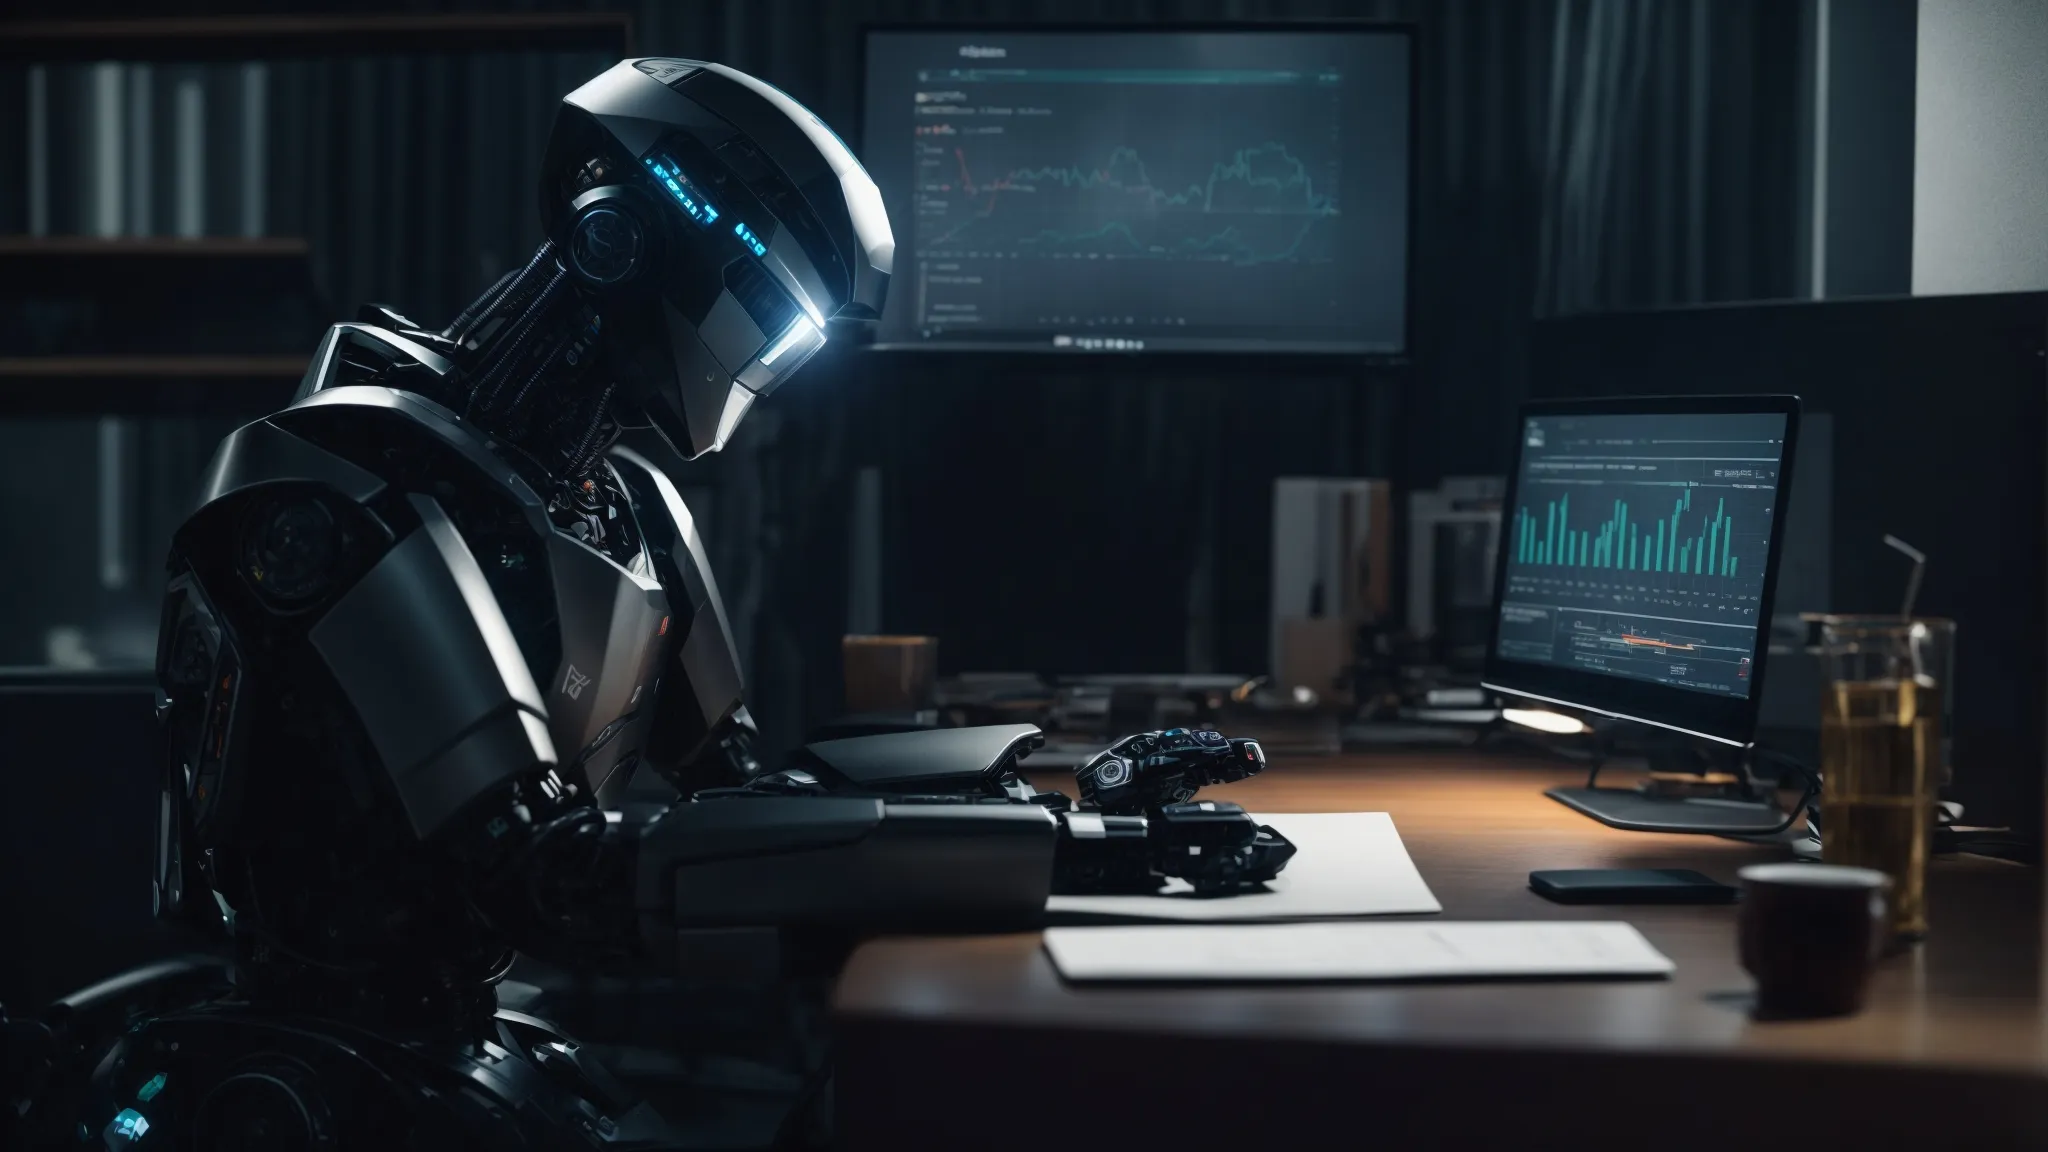 a futuristic robot sitting at a desk with a screen displaying graphs and analytics, while crafting a story.